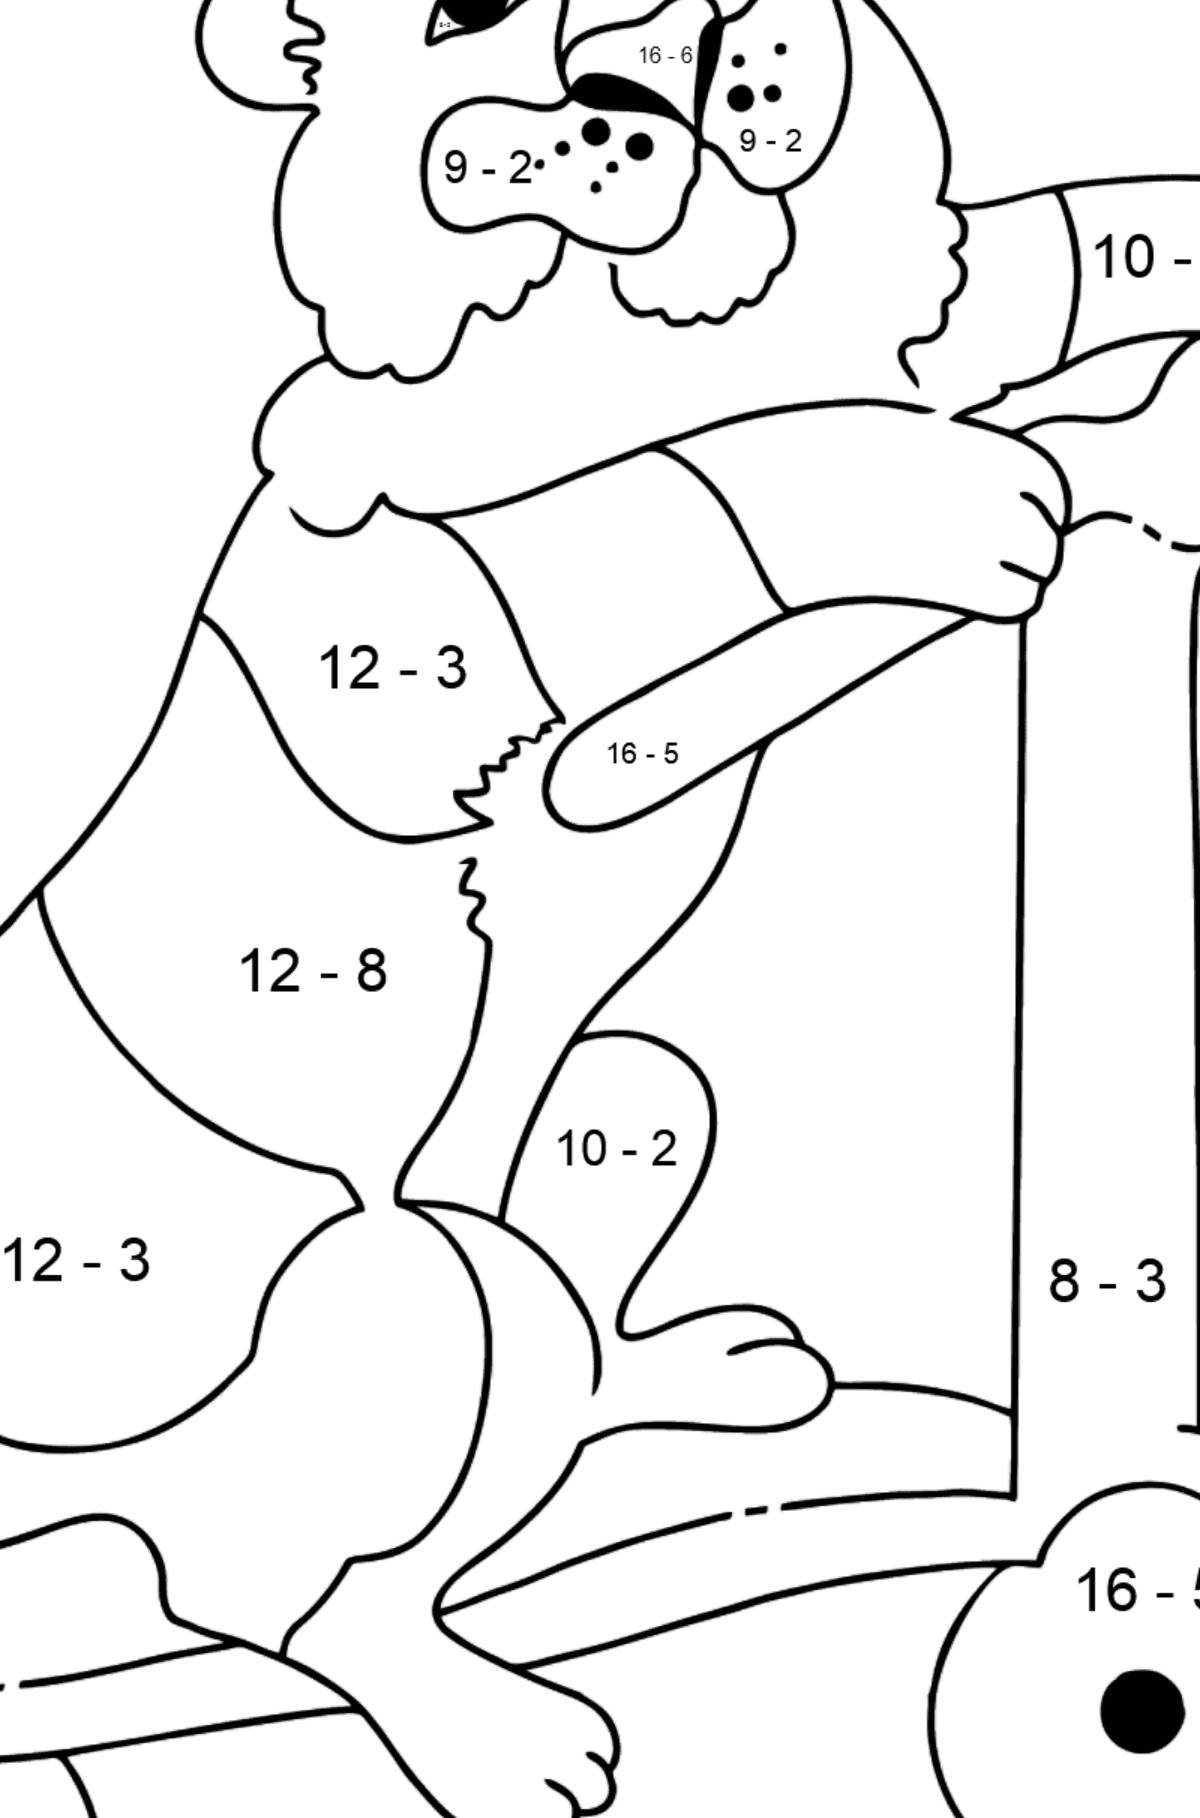 Coloring Page - A Tiger is Learning to Ride a Scooter - Math Coloring - Subtraction for Kids